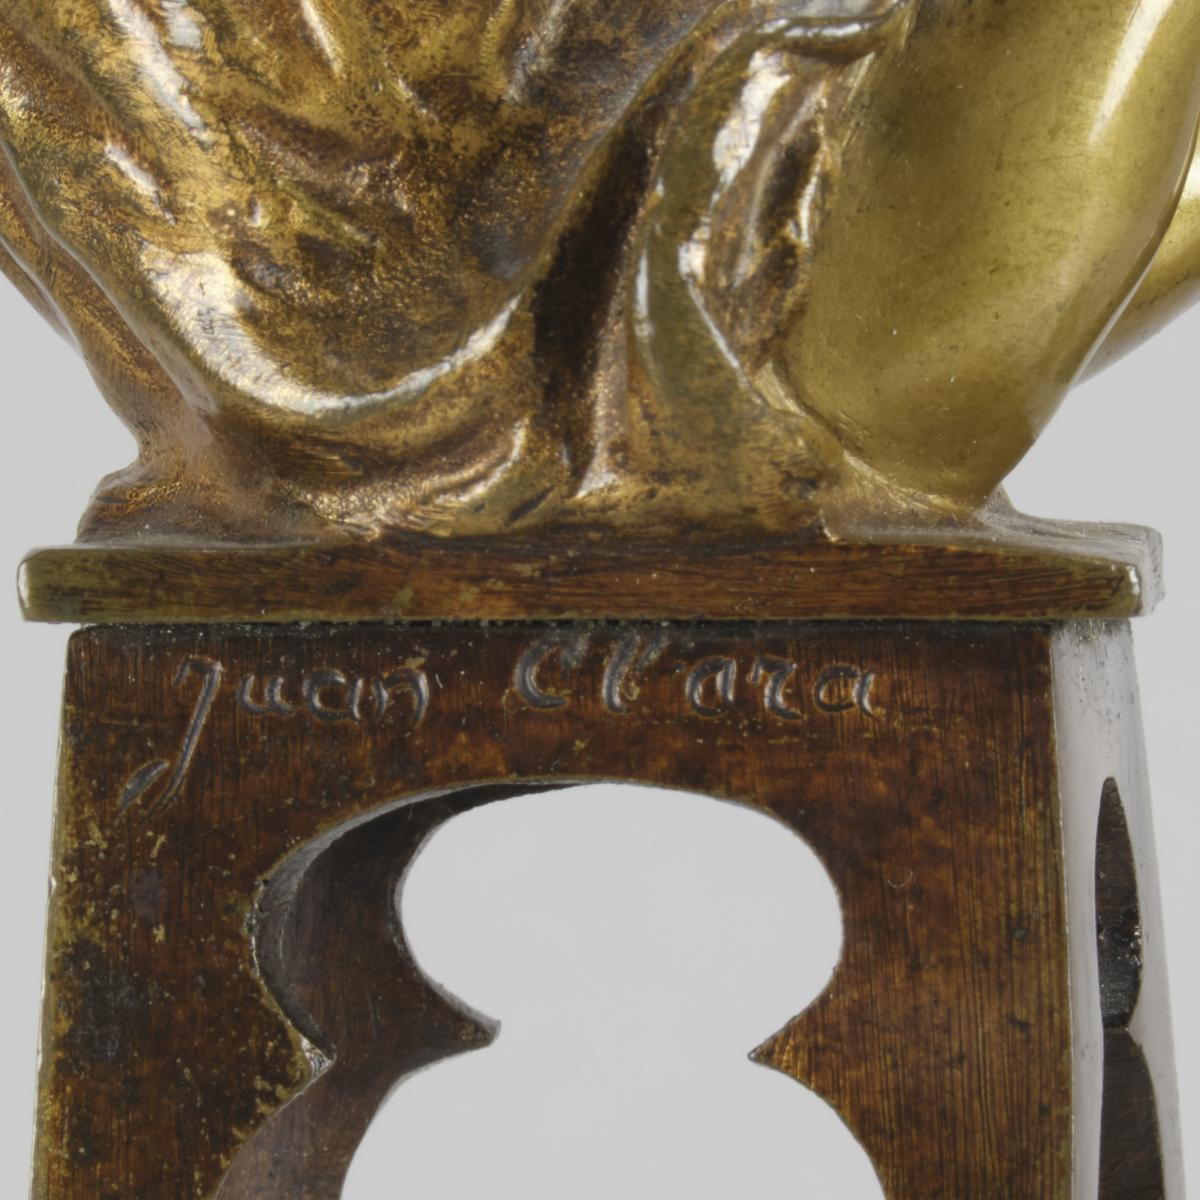 Early 20th Century Bronze Sculpture entitled "Girl Putting on her Shoe" by Juan Clara